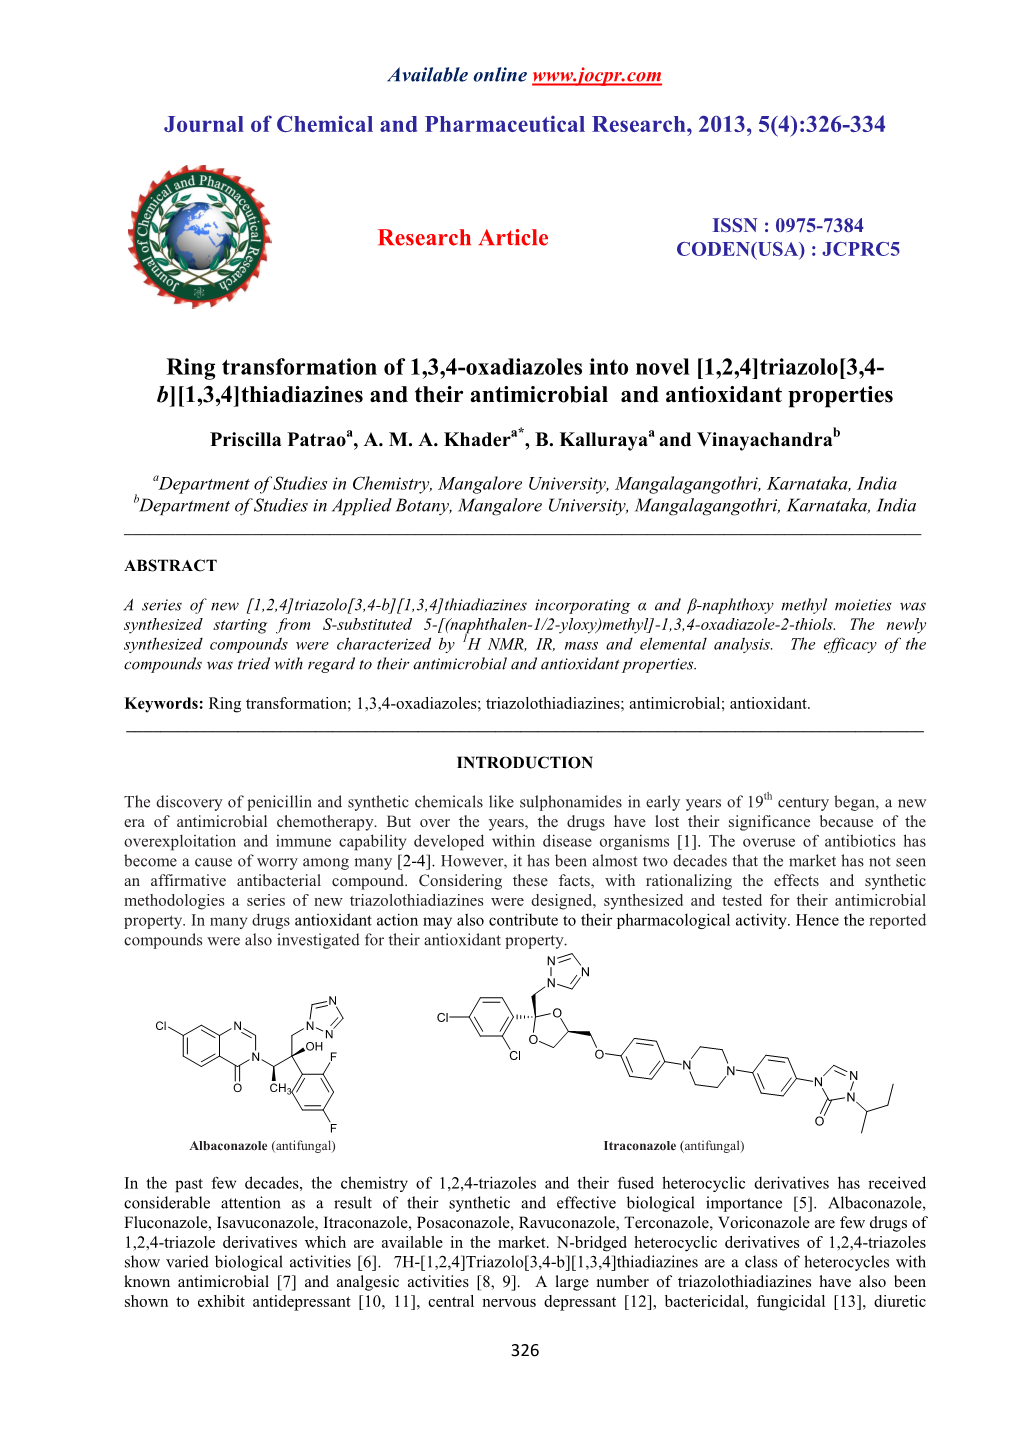 Journal of Chemical and Pharmaceutical Research, 2013, 5(4):326-334 Research Article Ring Transformation of 1,3,4-Oxadiazole